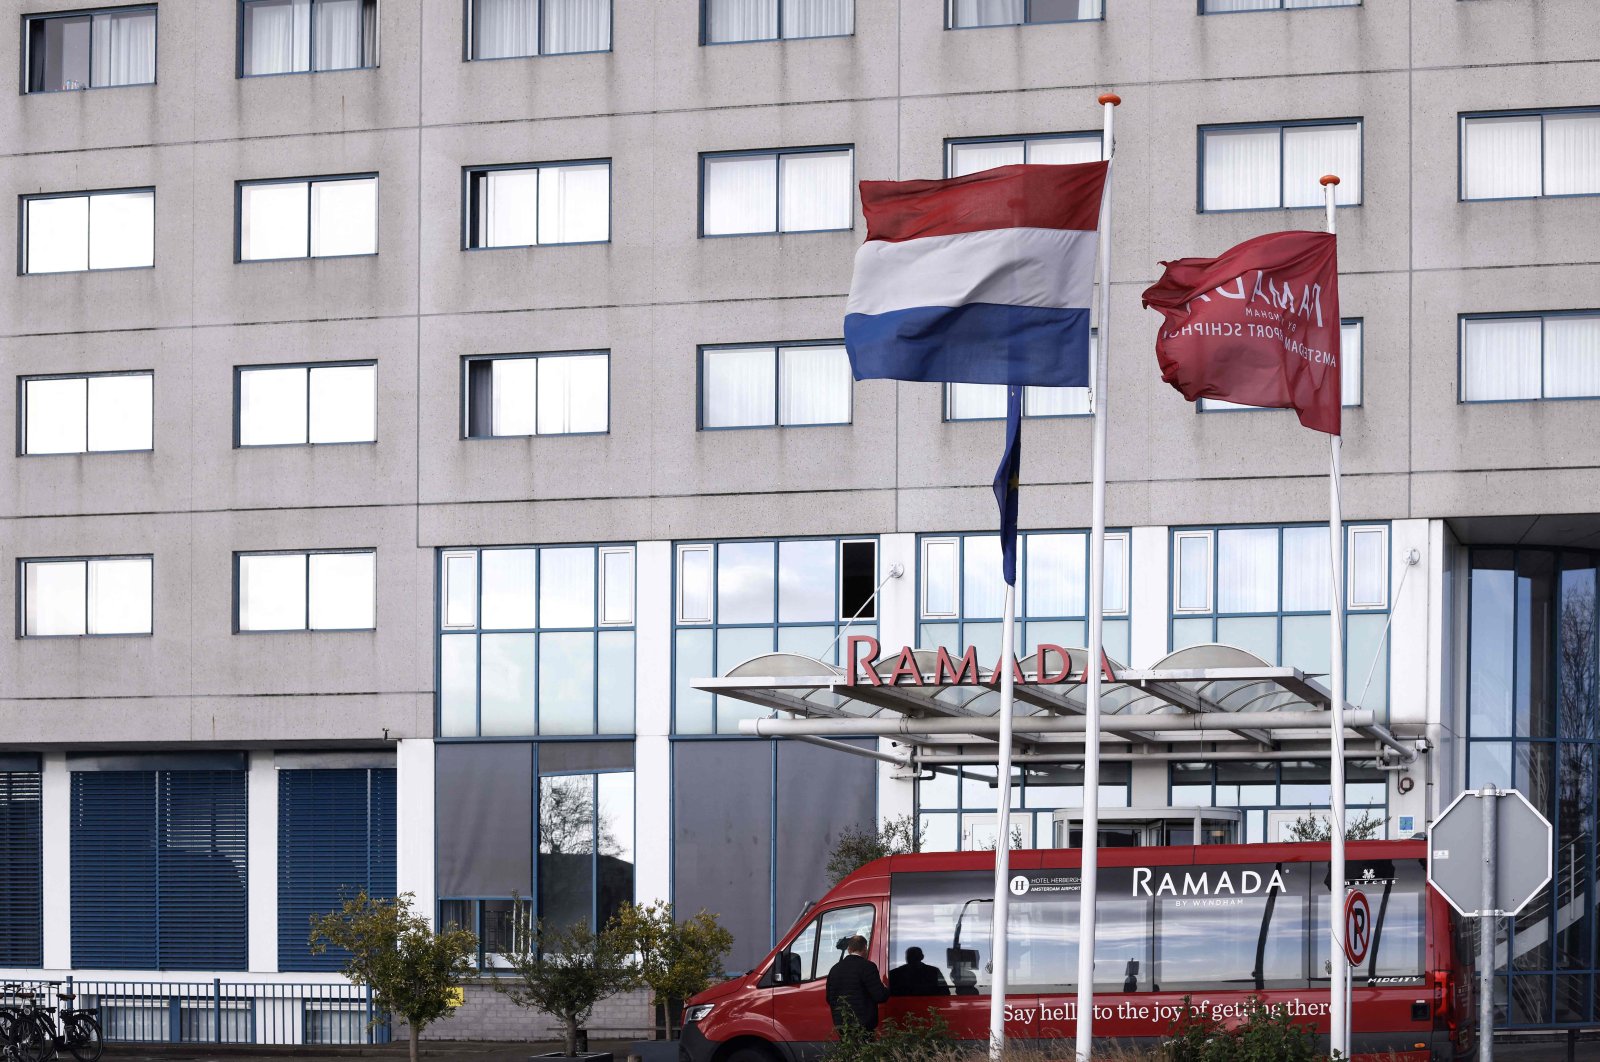 This photograph taken near Schiphol airport shows the Ramada Hotel where Dutch authorities have isolated 61 passengers who tested positive after arriving on two flights from South Africa, Badhoevedorp, Netherlands, Nov. 29, 2021. (AFP Photo)